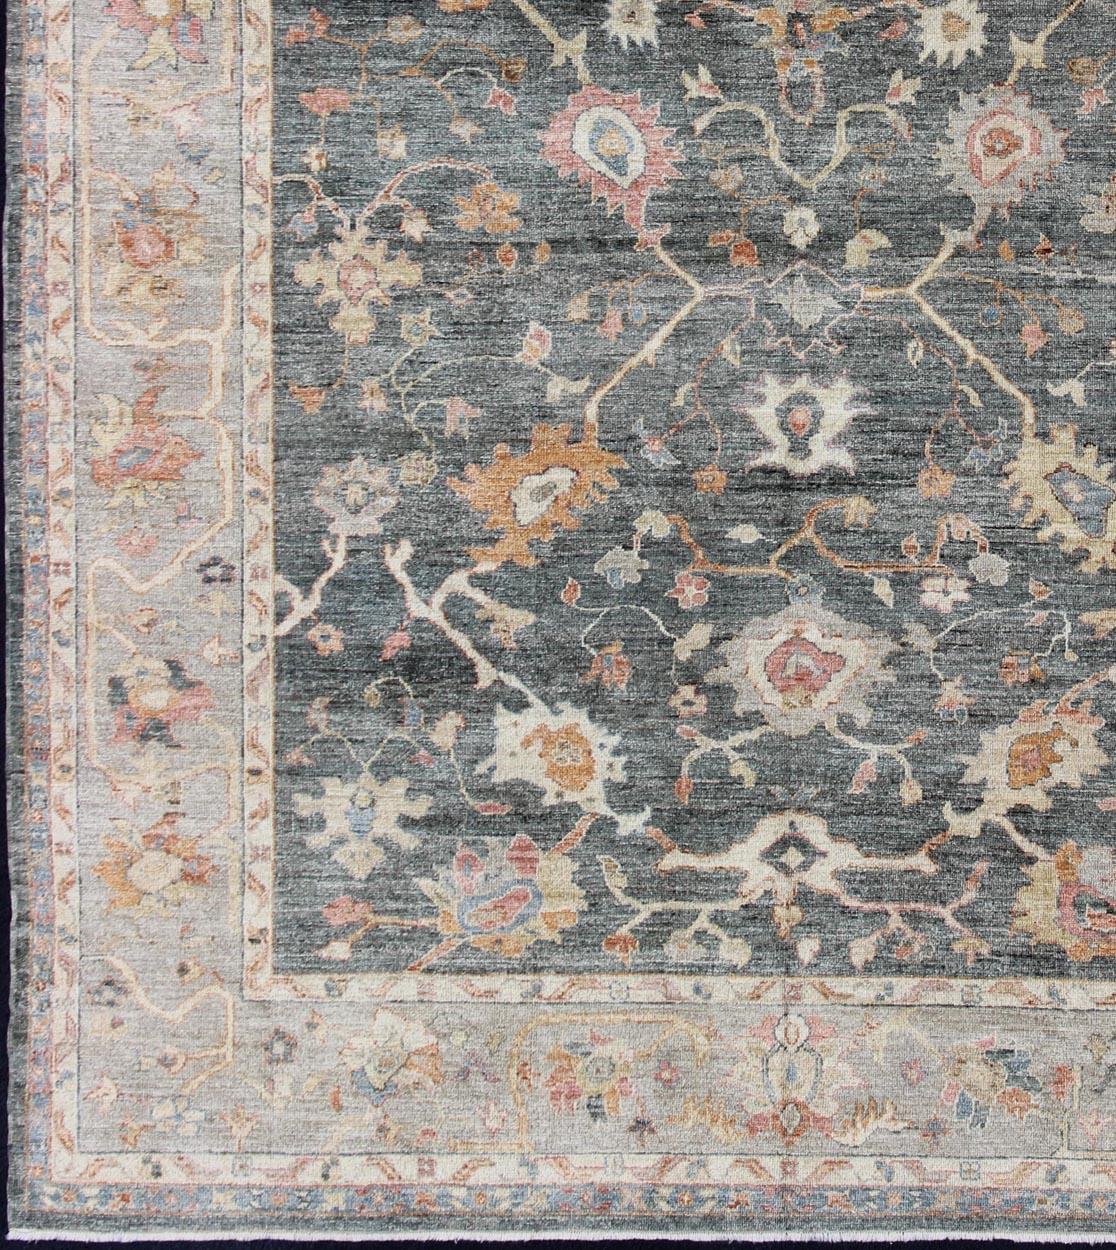 Dark gray and Peach Angora Oushak rug from Turkey, rug an-134564, country of origin / type: Turkey / Angora Oushak

From our Angora Collection, this piece is made with a combination of angora and old wool. Featuring all organic materials, the